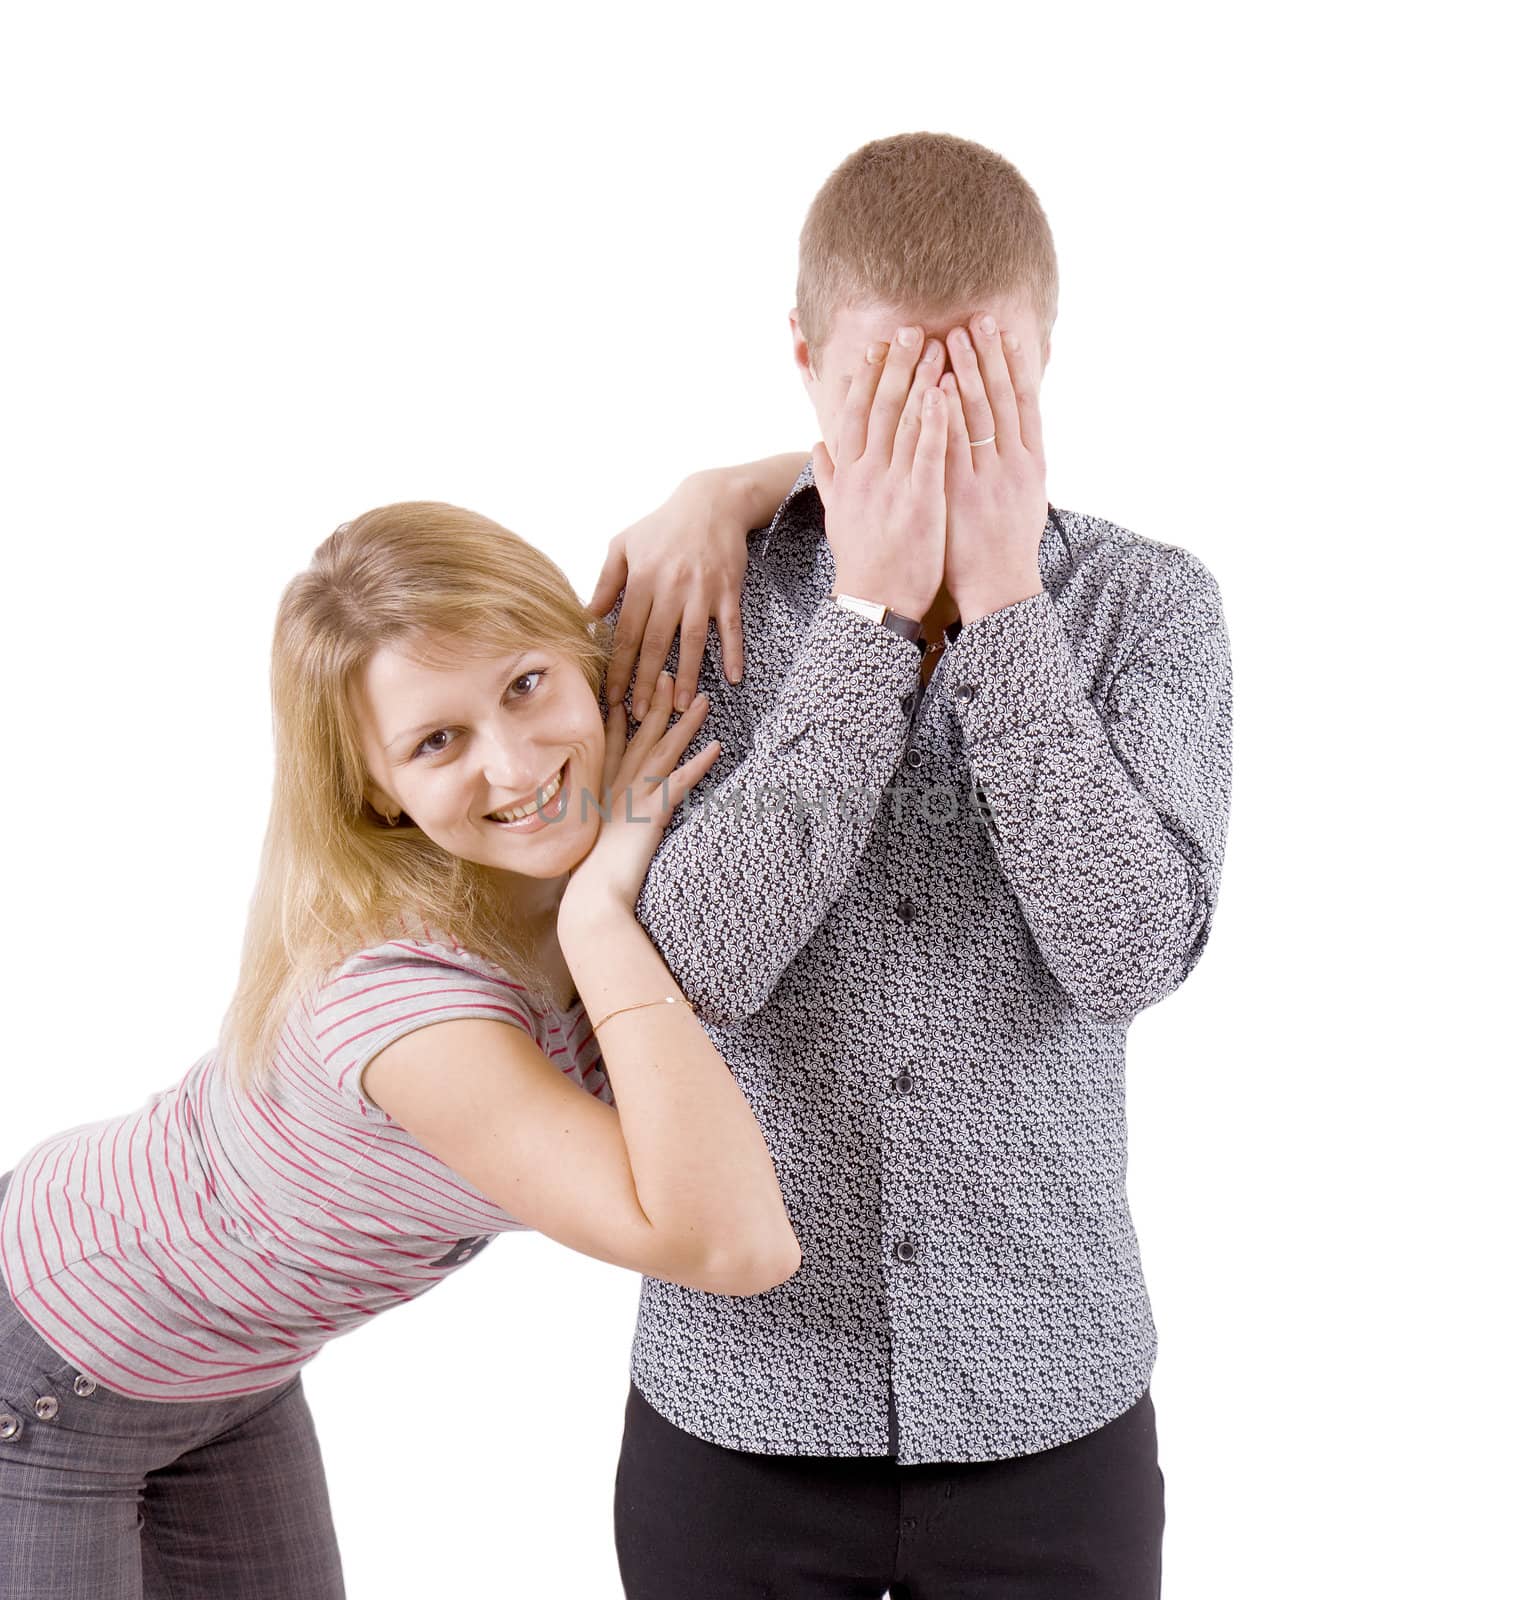 young couple. A man hides his face. The woman smiles hugging a man
